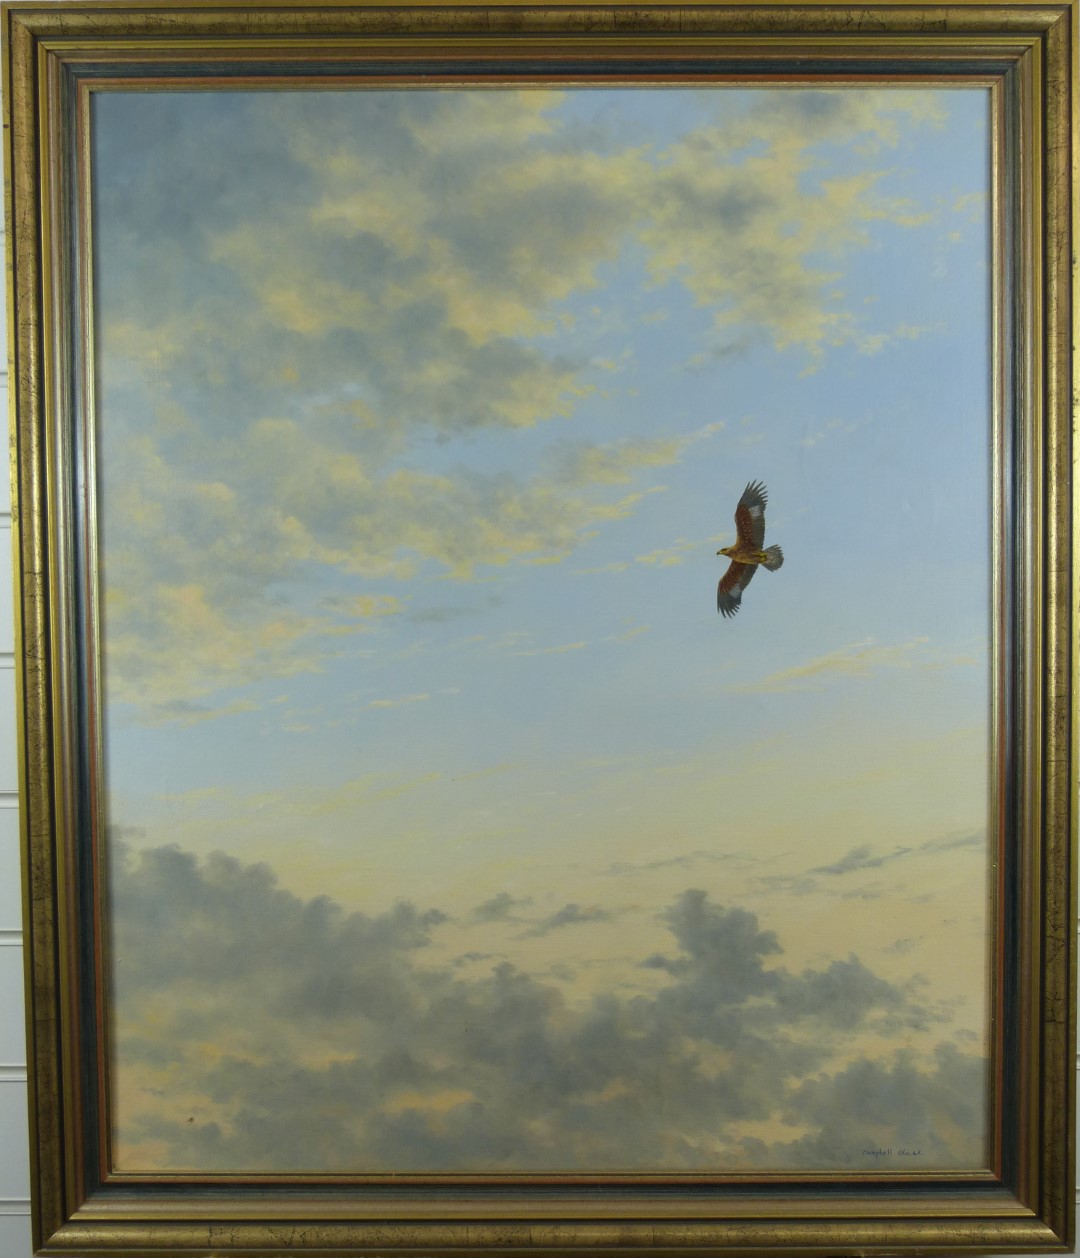 Geoffrey Campbell-Black (b1925) oil on canvas of Golden Eagle soaring in a cloudy sky, signed - Image 2 of 5